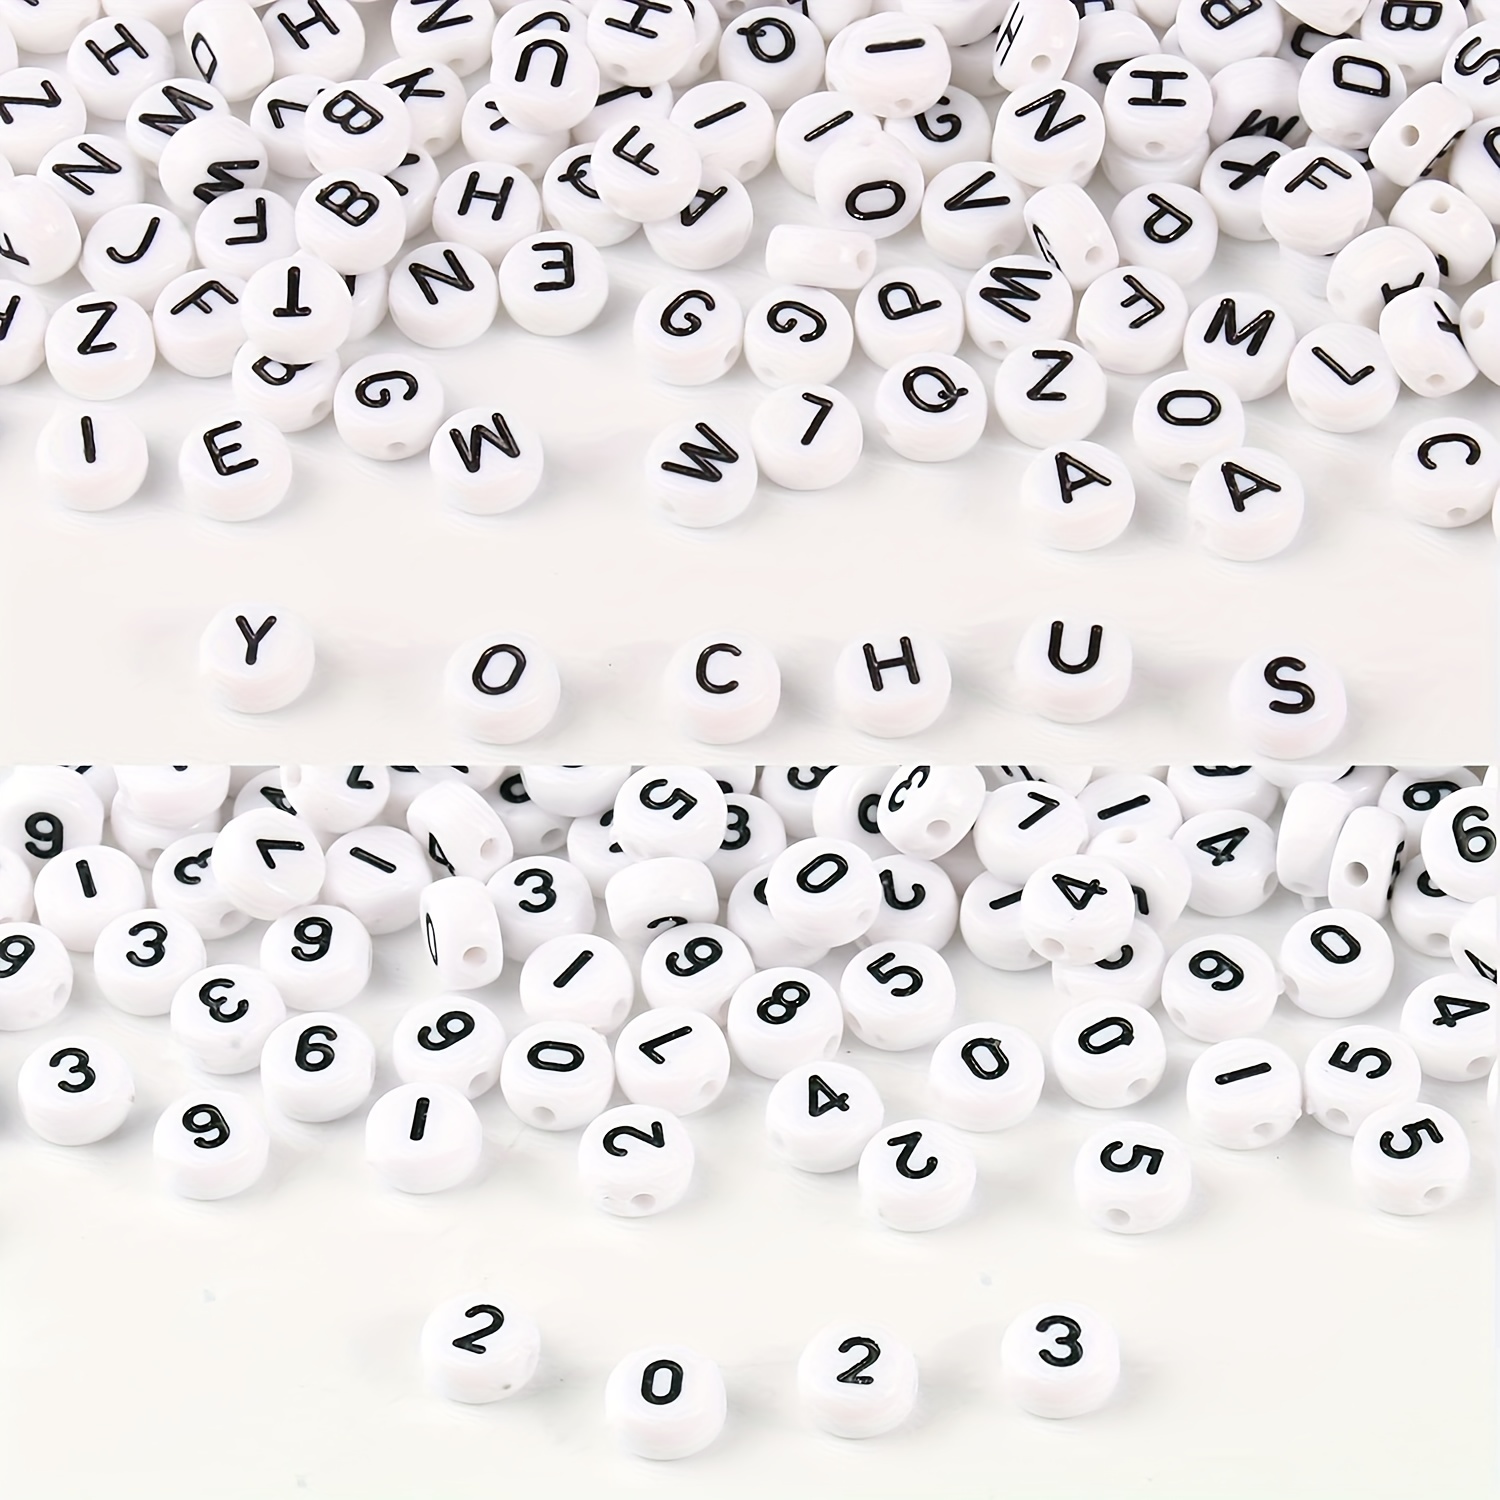 1400 Pcs Acrylic Letter Beads with a Roll Wire Alphabet Beads AZ Sorted,7mm  Letter Beads Bulk for Jewelry Bracelet Making (Black&White)